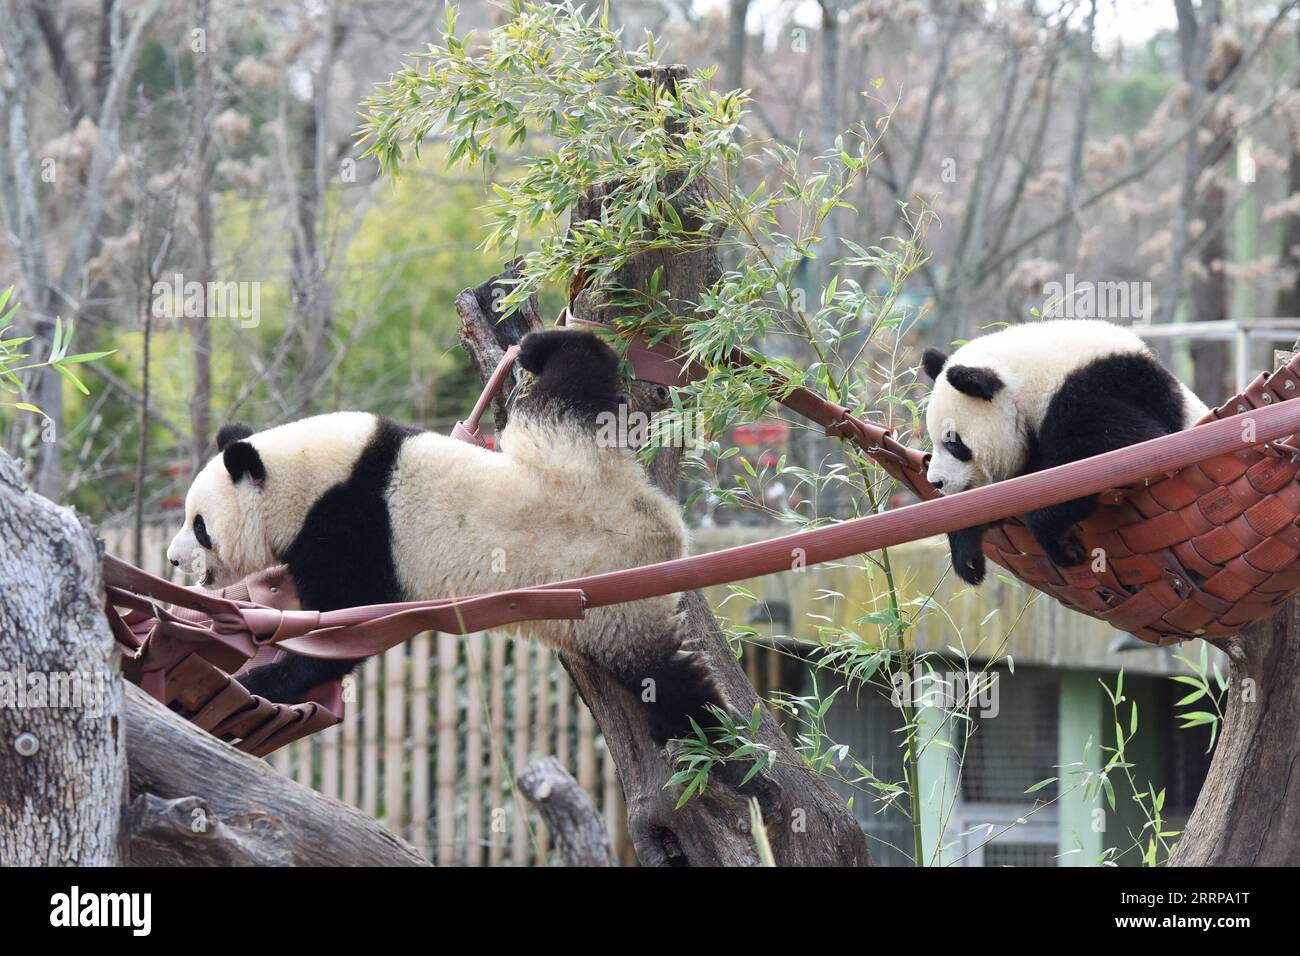 230308 -- MADRID, March 8, 2023 -- Giant pandas You You and Jiu Jiu have fun at Zoo Aquarium in Madrid, Spain, March 7, 2023. Thanks to close cooperation between Zoo Aquarium and China Conservation and Research Center for the Giant Panda, specialists and staff members managed to breed this extremely rare species in a country far away from its homeland. You You and Jiu Jiu were born to Hua Zuiba and her partner Bing Xing in September, 2021. This giant panda family is cordially deemed a bridge of friendship between Spain and China. Photo by /Xinhua SPAIN-MADRID-CHINA-PANDA-BRIDGE OF FRIENDSHIP G Stock Photo